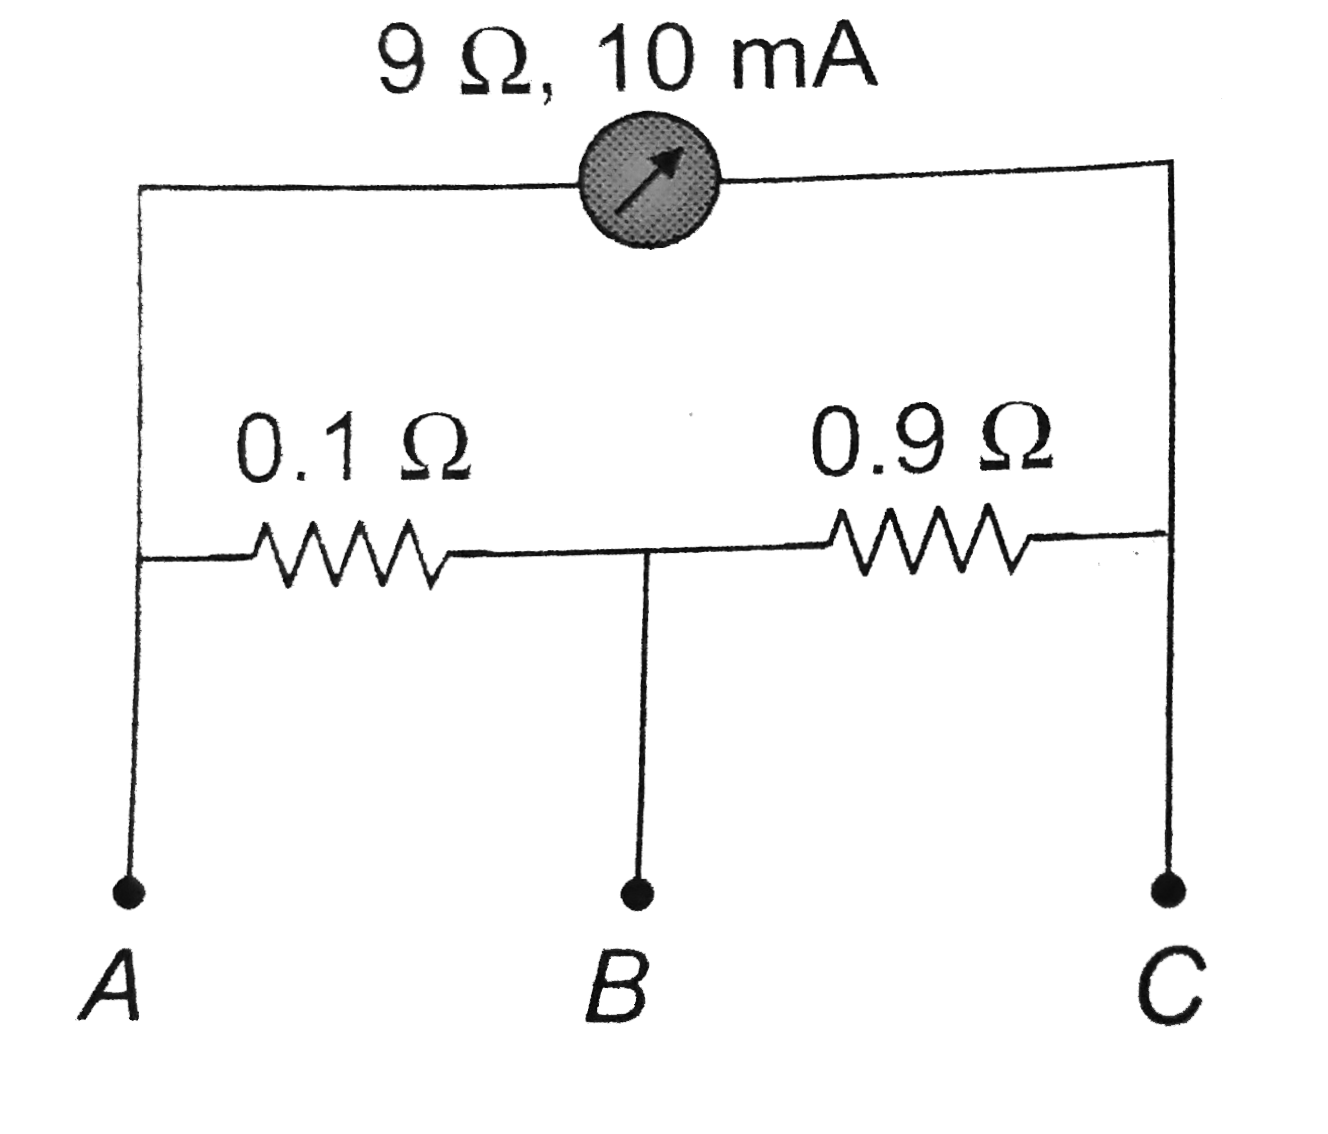 A milliammeter of range 10 mA and resistance 9 Omega is joined in a circuit as shown. The metre gives full-scale deflection for curretn I when A and B are used as its terminals, i.e., current enters at A and leaves at B (C is left isolated). The value if I is